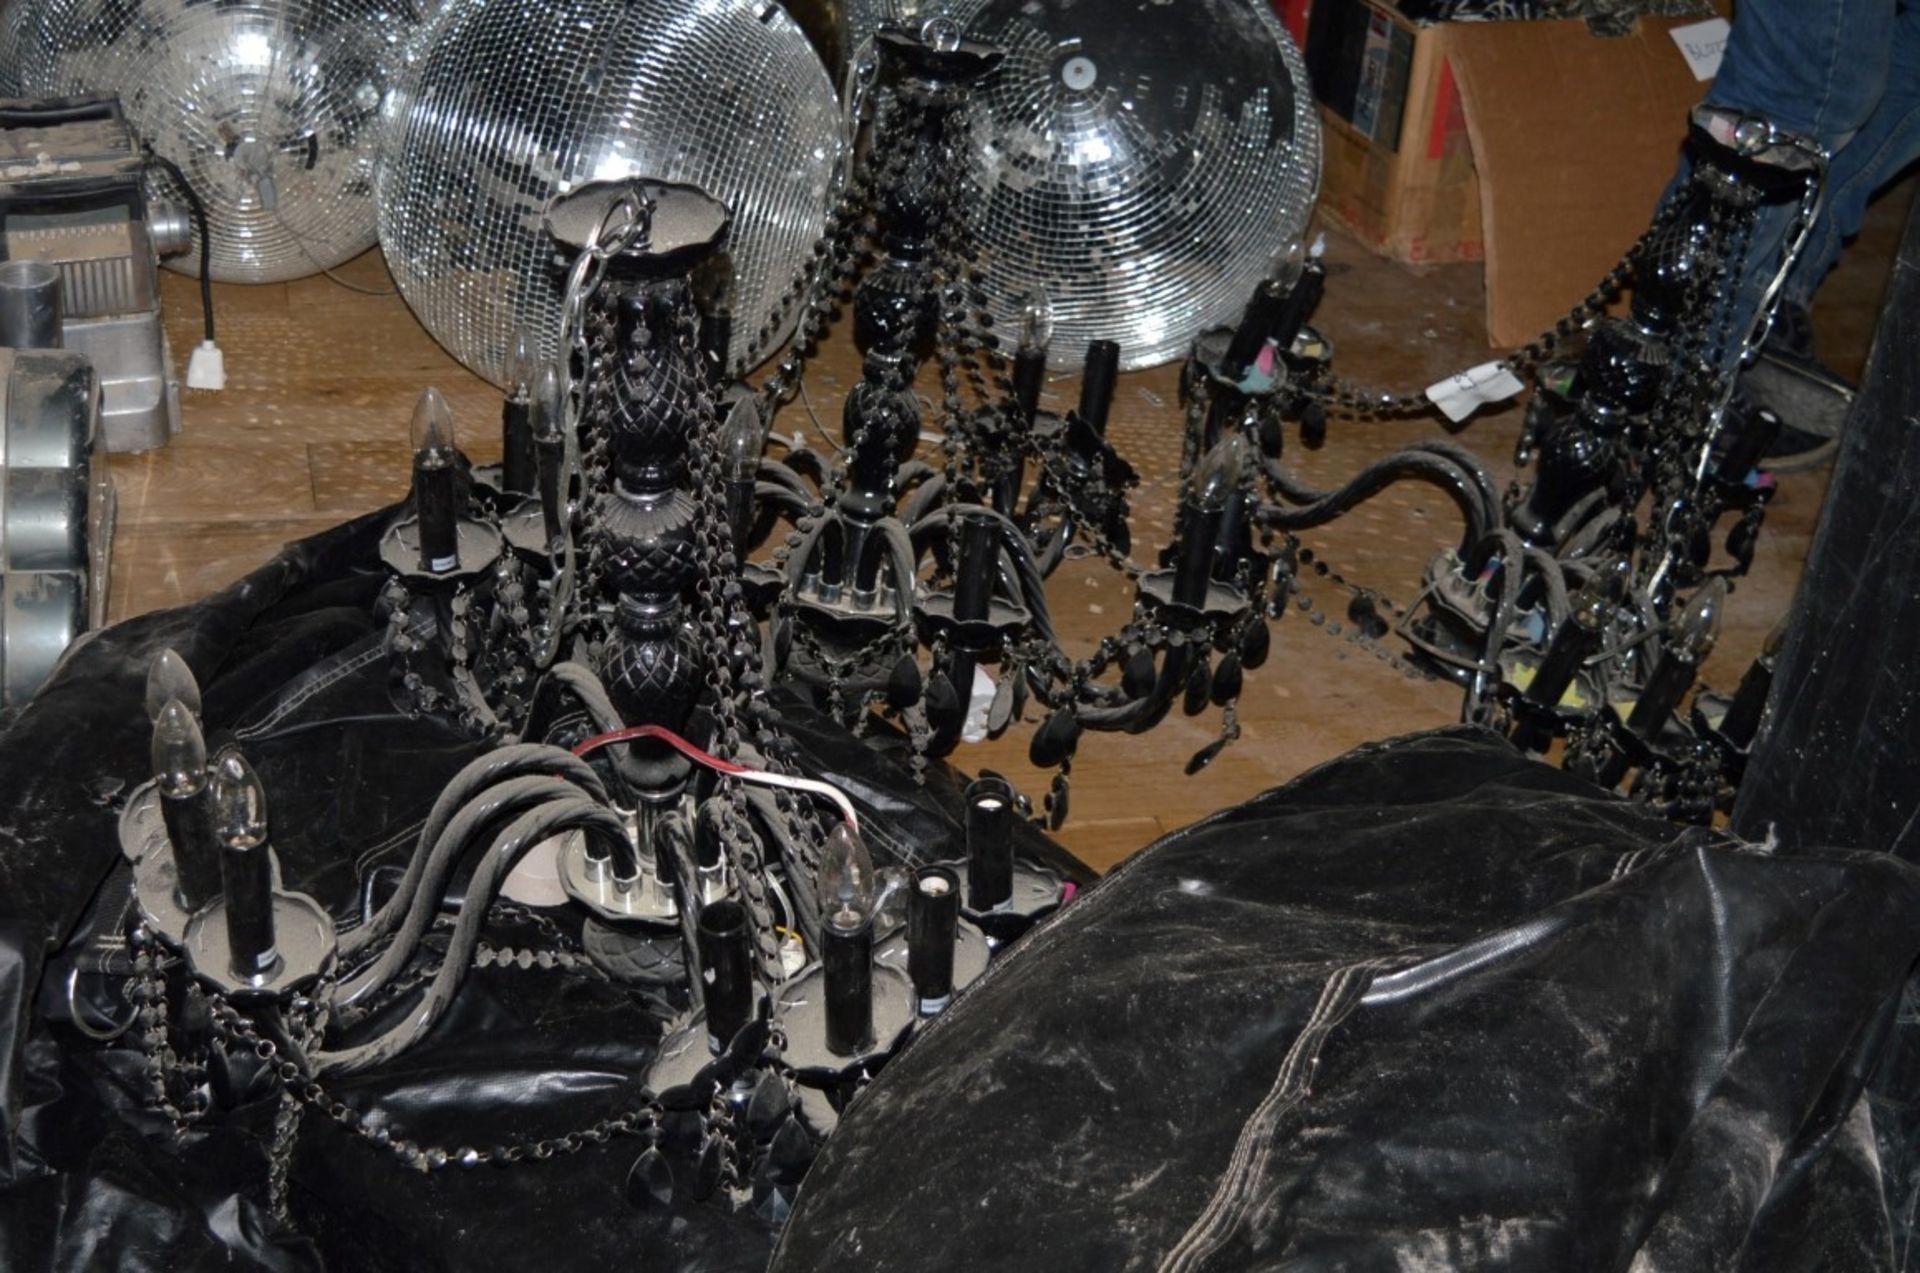 Set of THREE Matching CHANDALIERS Black Gothic Design - CL090 - Ref FBA BL133 - Location: - Image 2 of 8